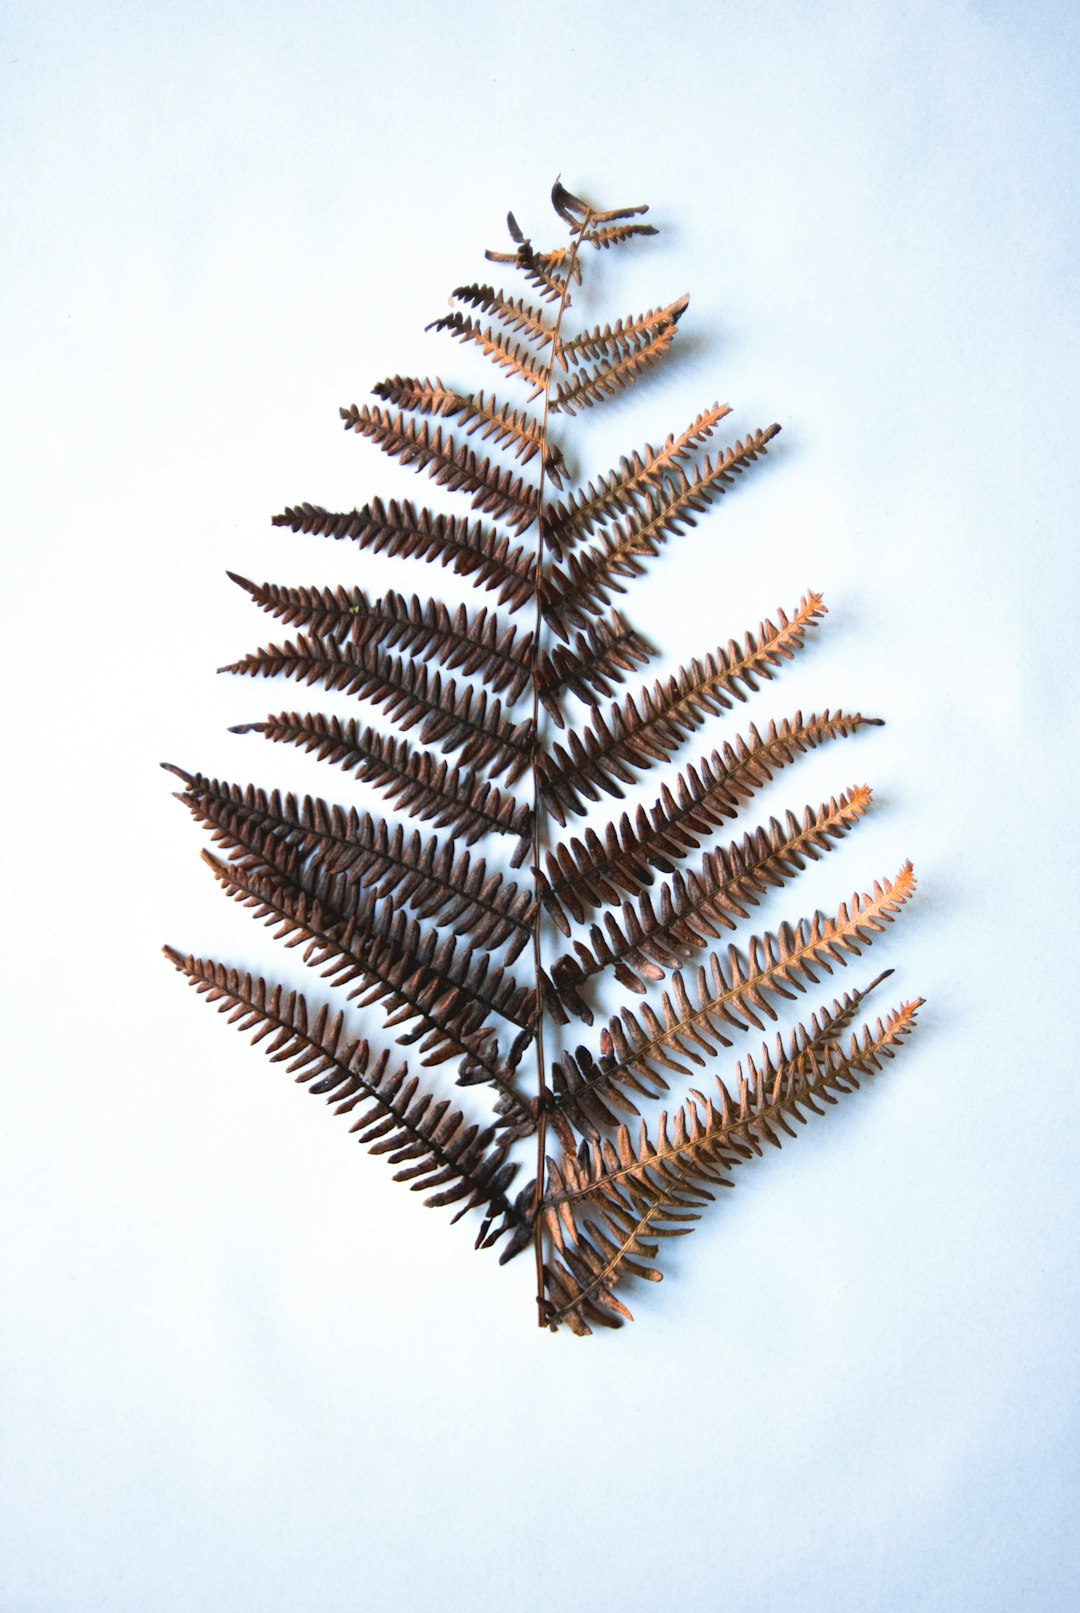 brown fern on white surface